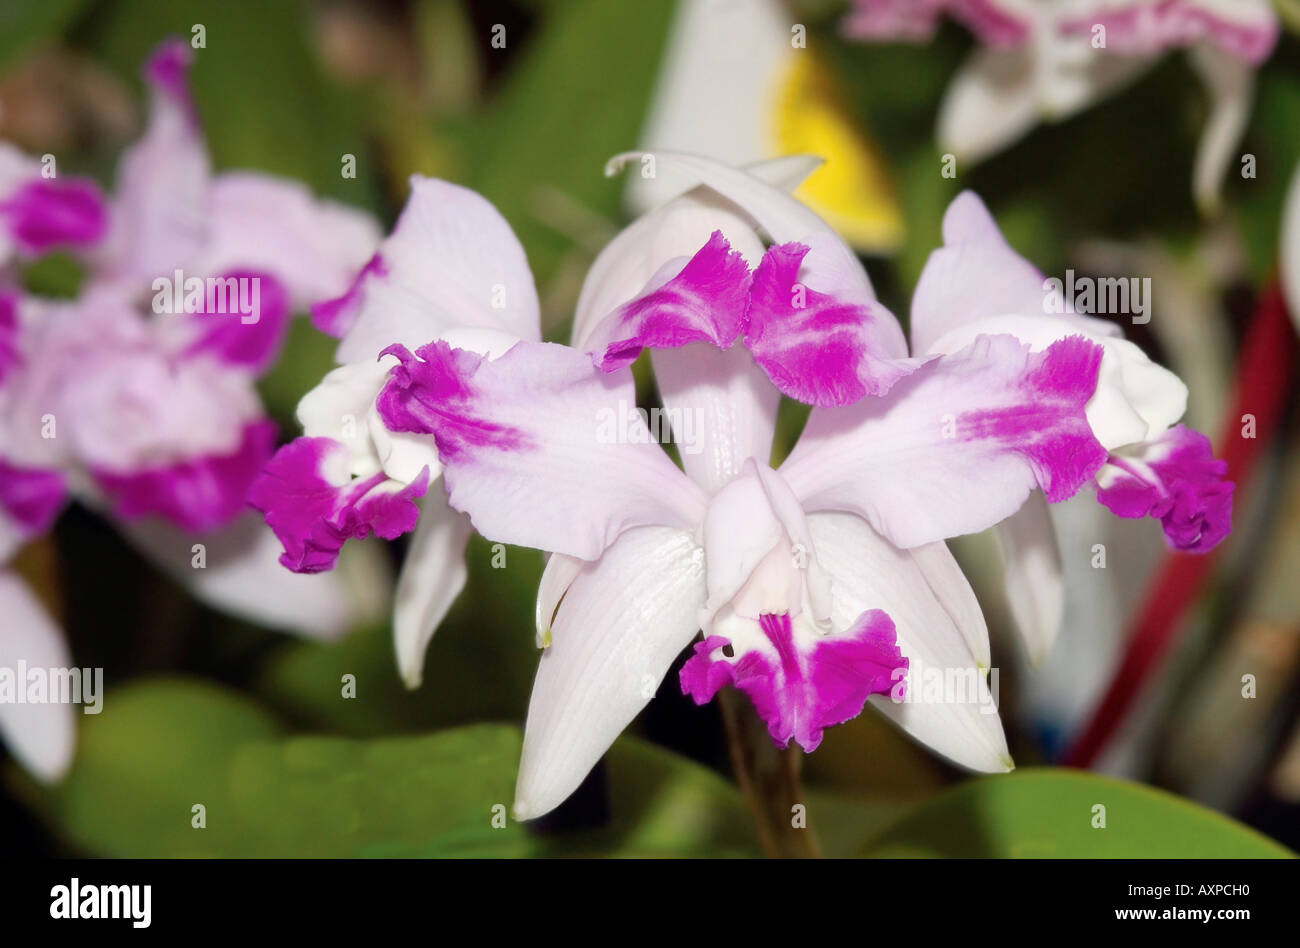 Cattleya orchid flowers Stock Photo